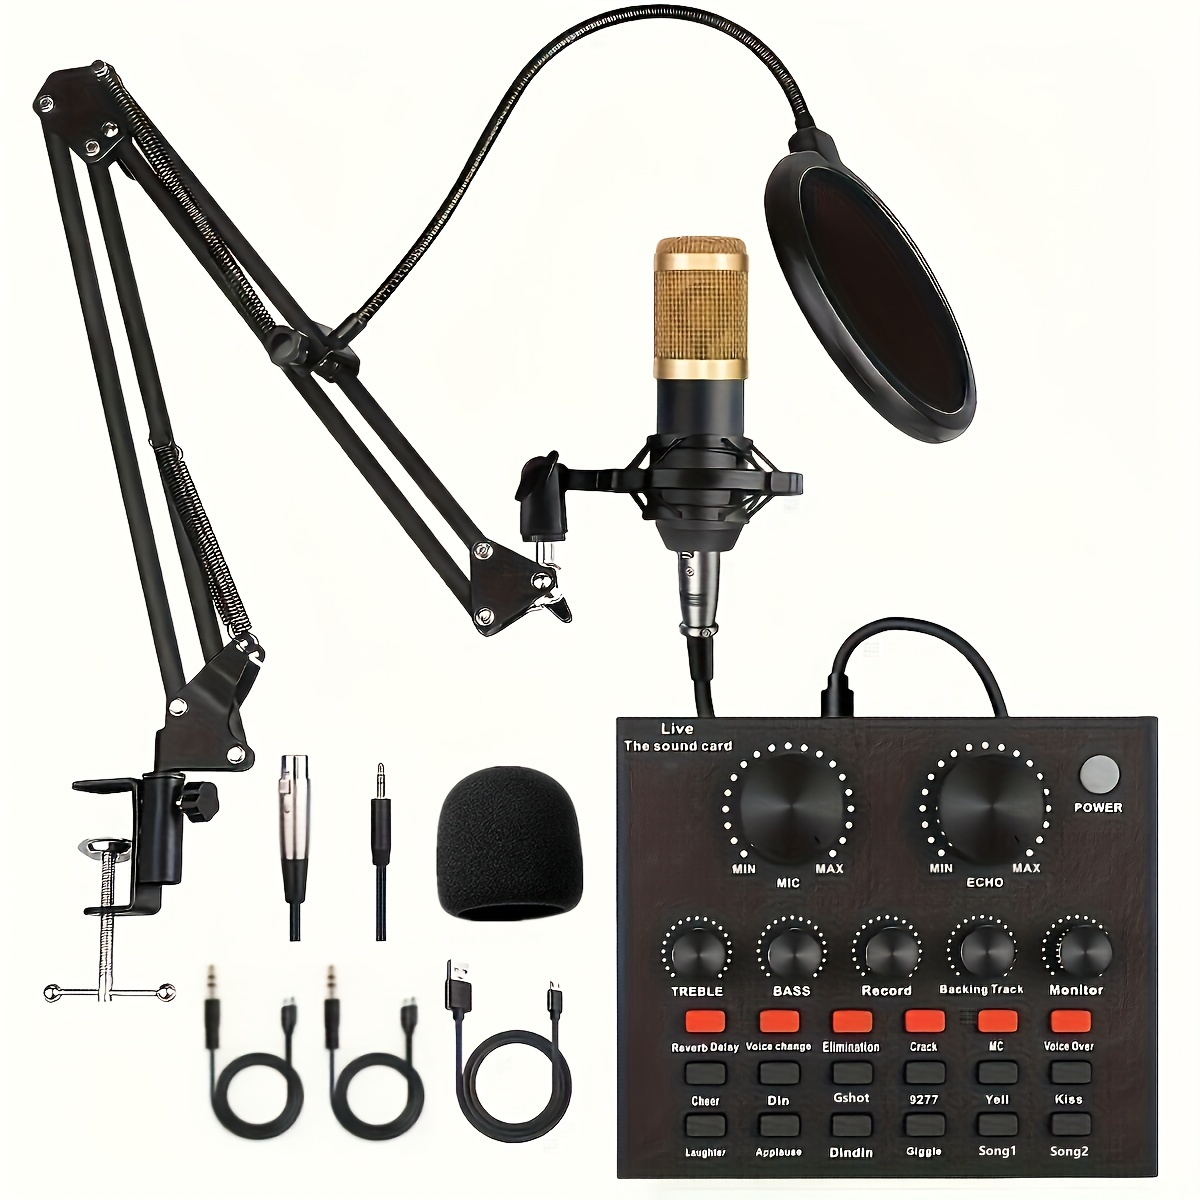 

Podcast Equipment Bundle, With Bm800 Podcast Microphone And V8 Sound Card, Voice Changer - Audio Interface -perfect For Recording, Singing, Streaming And Gaming